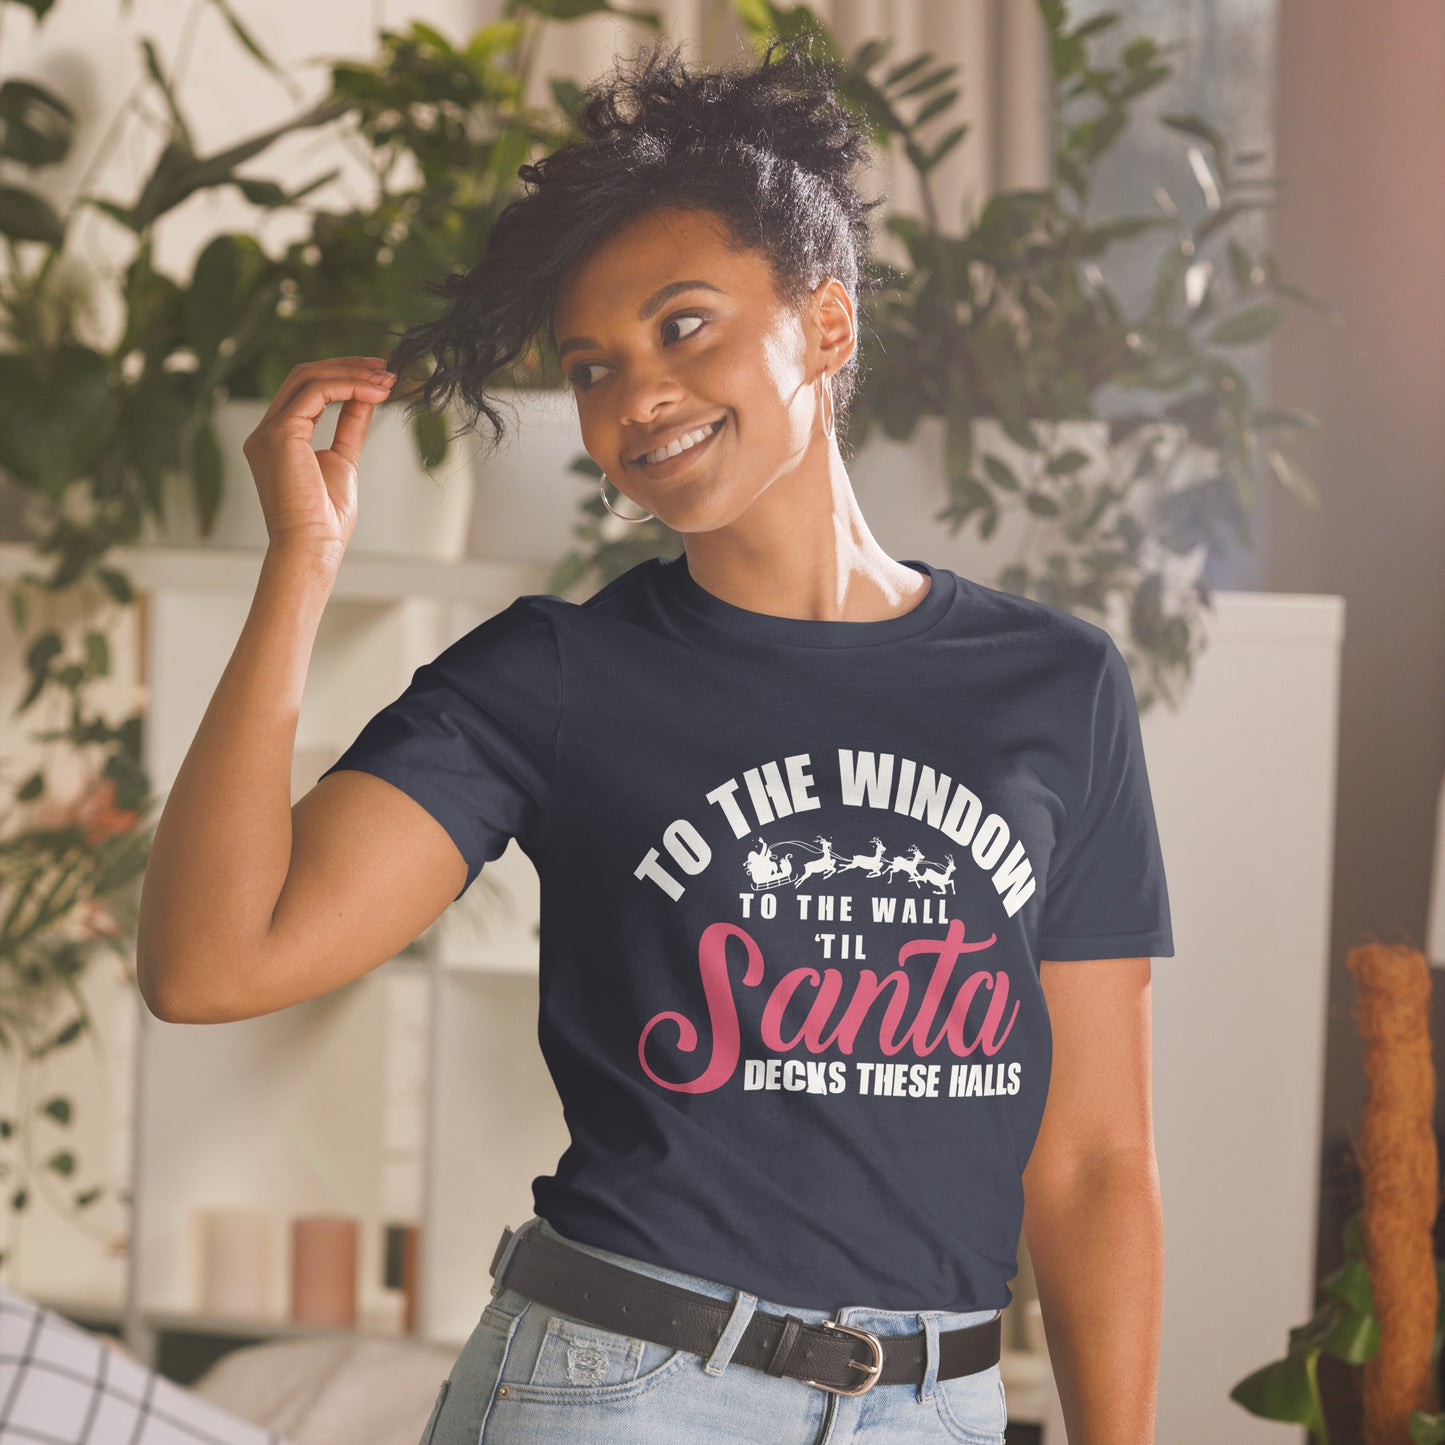 Christmas Short-Sleeve Unisex T-Shirt - To The Window To The Wall 'Til Santa Decks These Halls